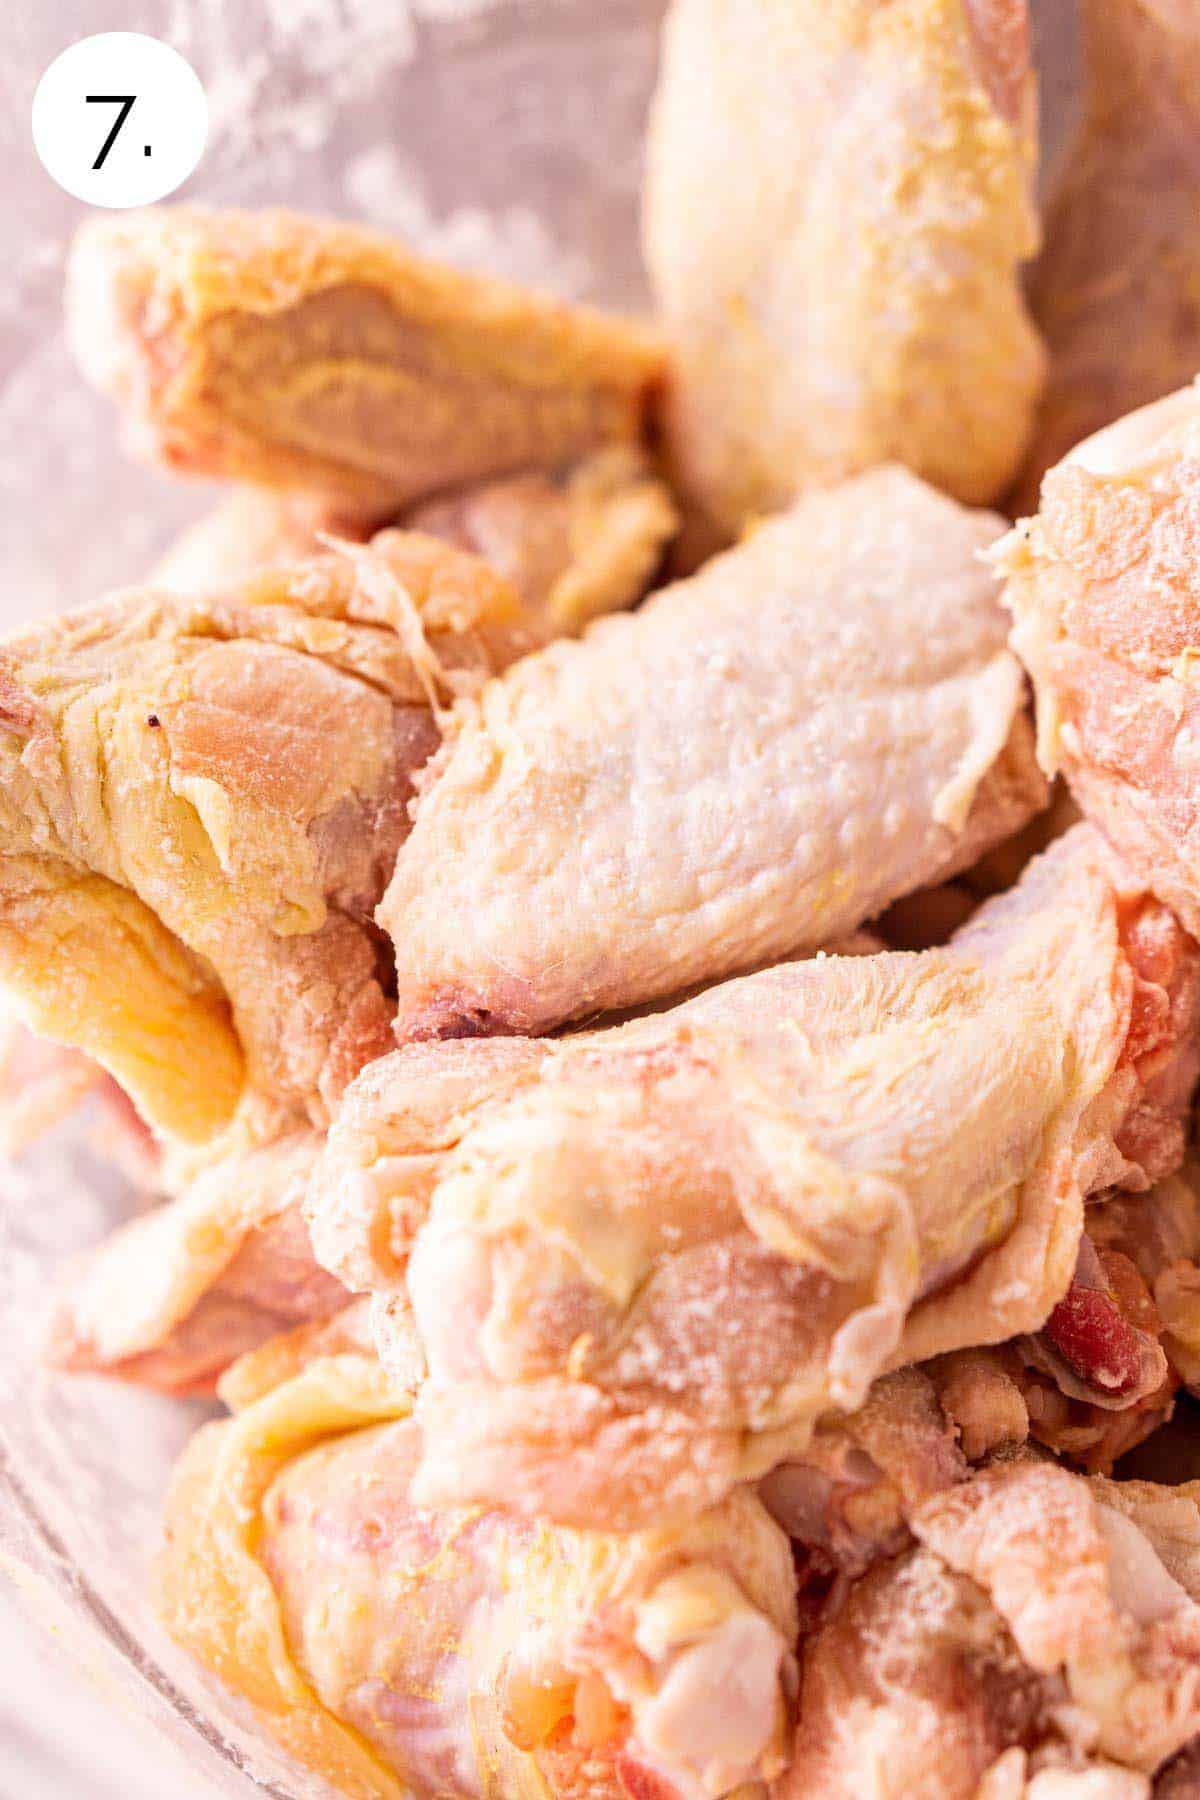 The chicken pieces in a large glass mixing bowl after they've been coated with baking powder.